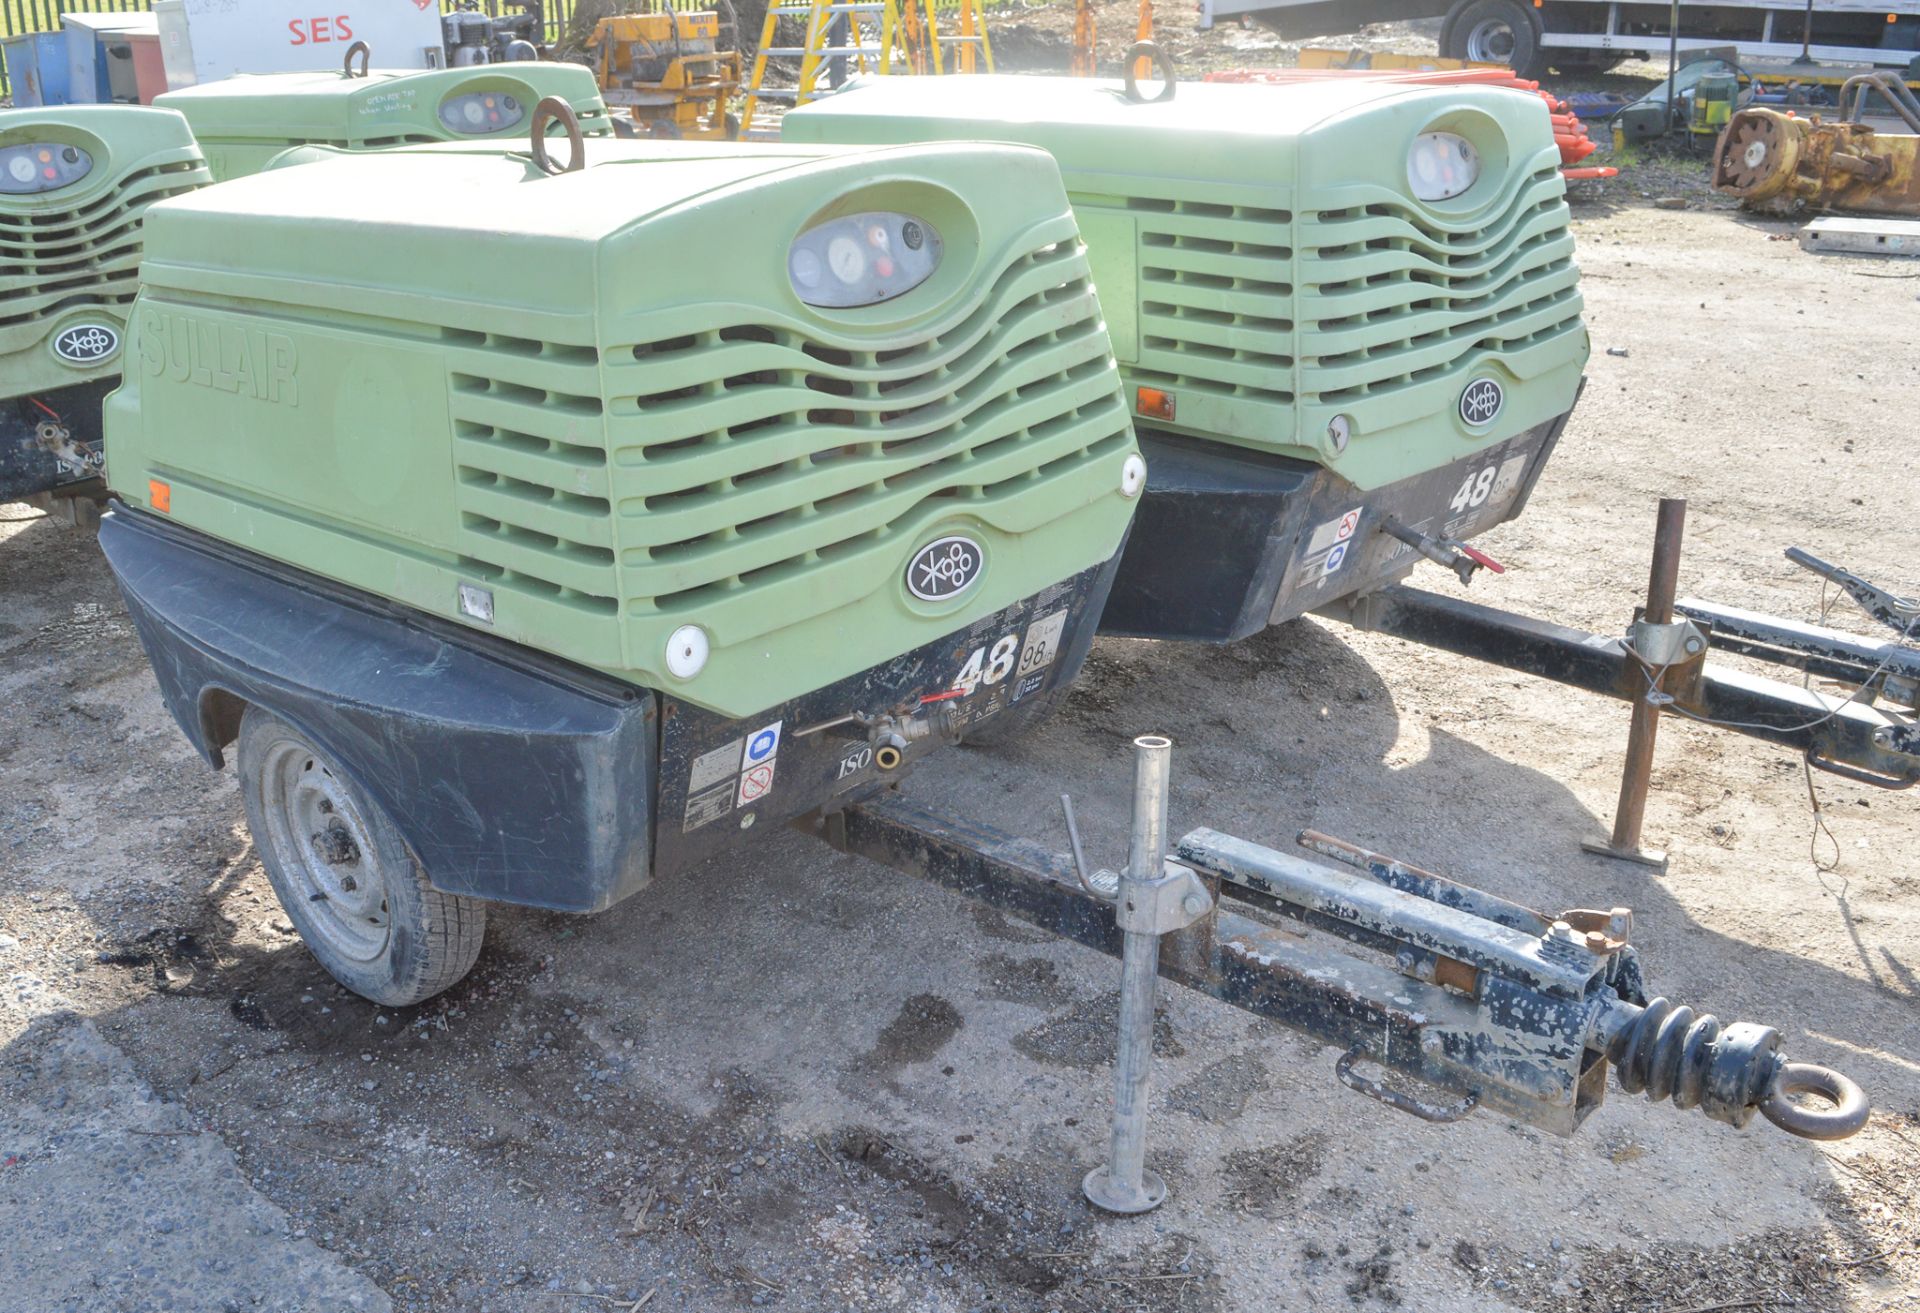 Sullair 48K diesel driven mobile air compressor Year: 2007 S/N: 48985 Recorded Hours: 746